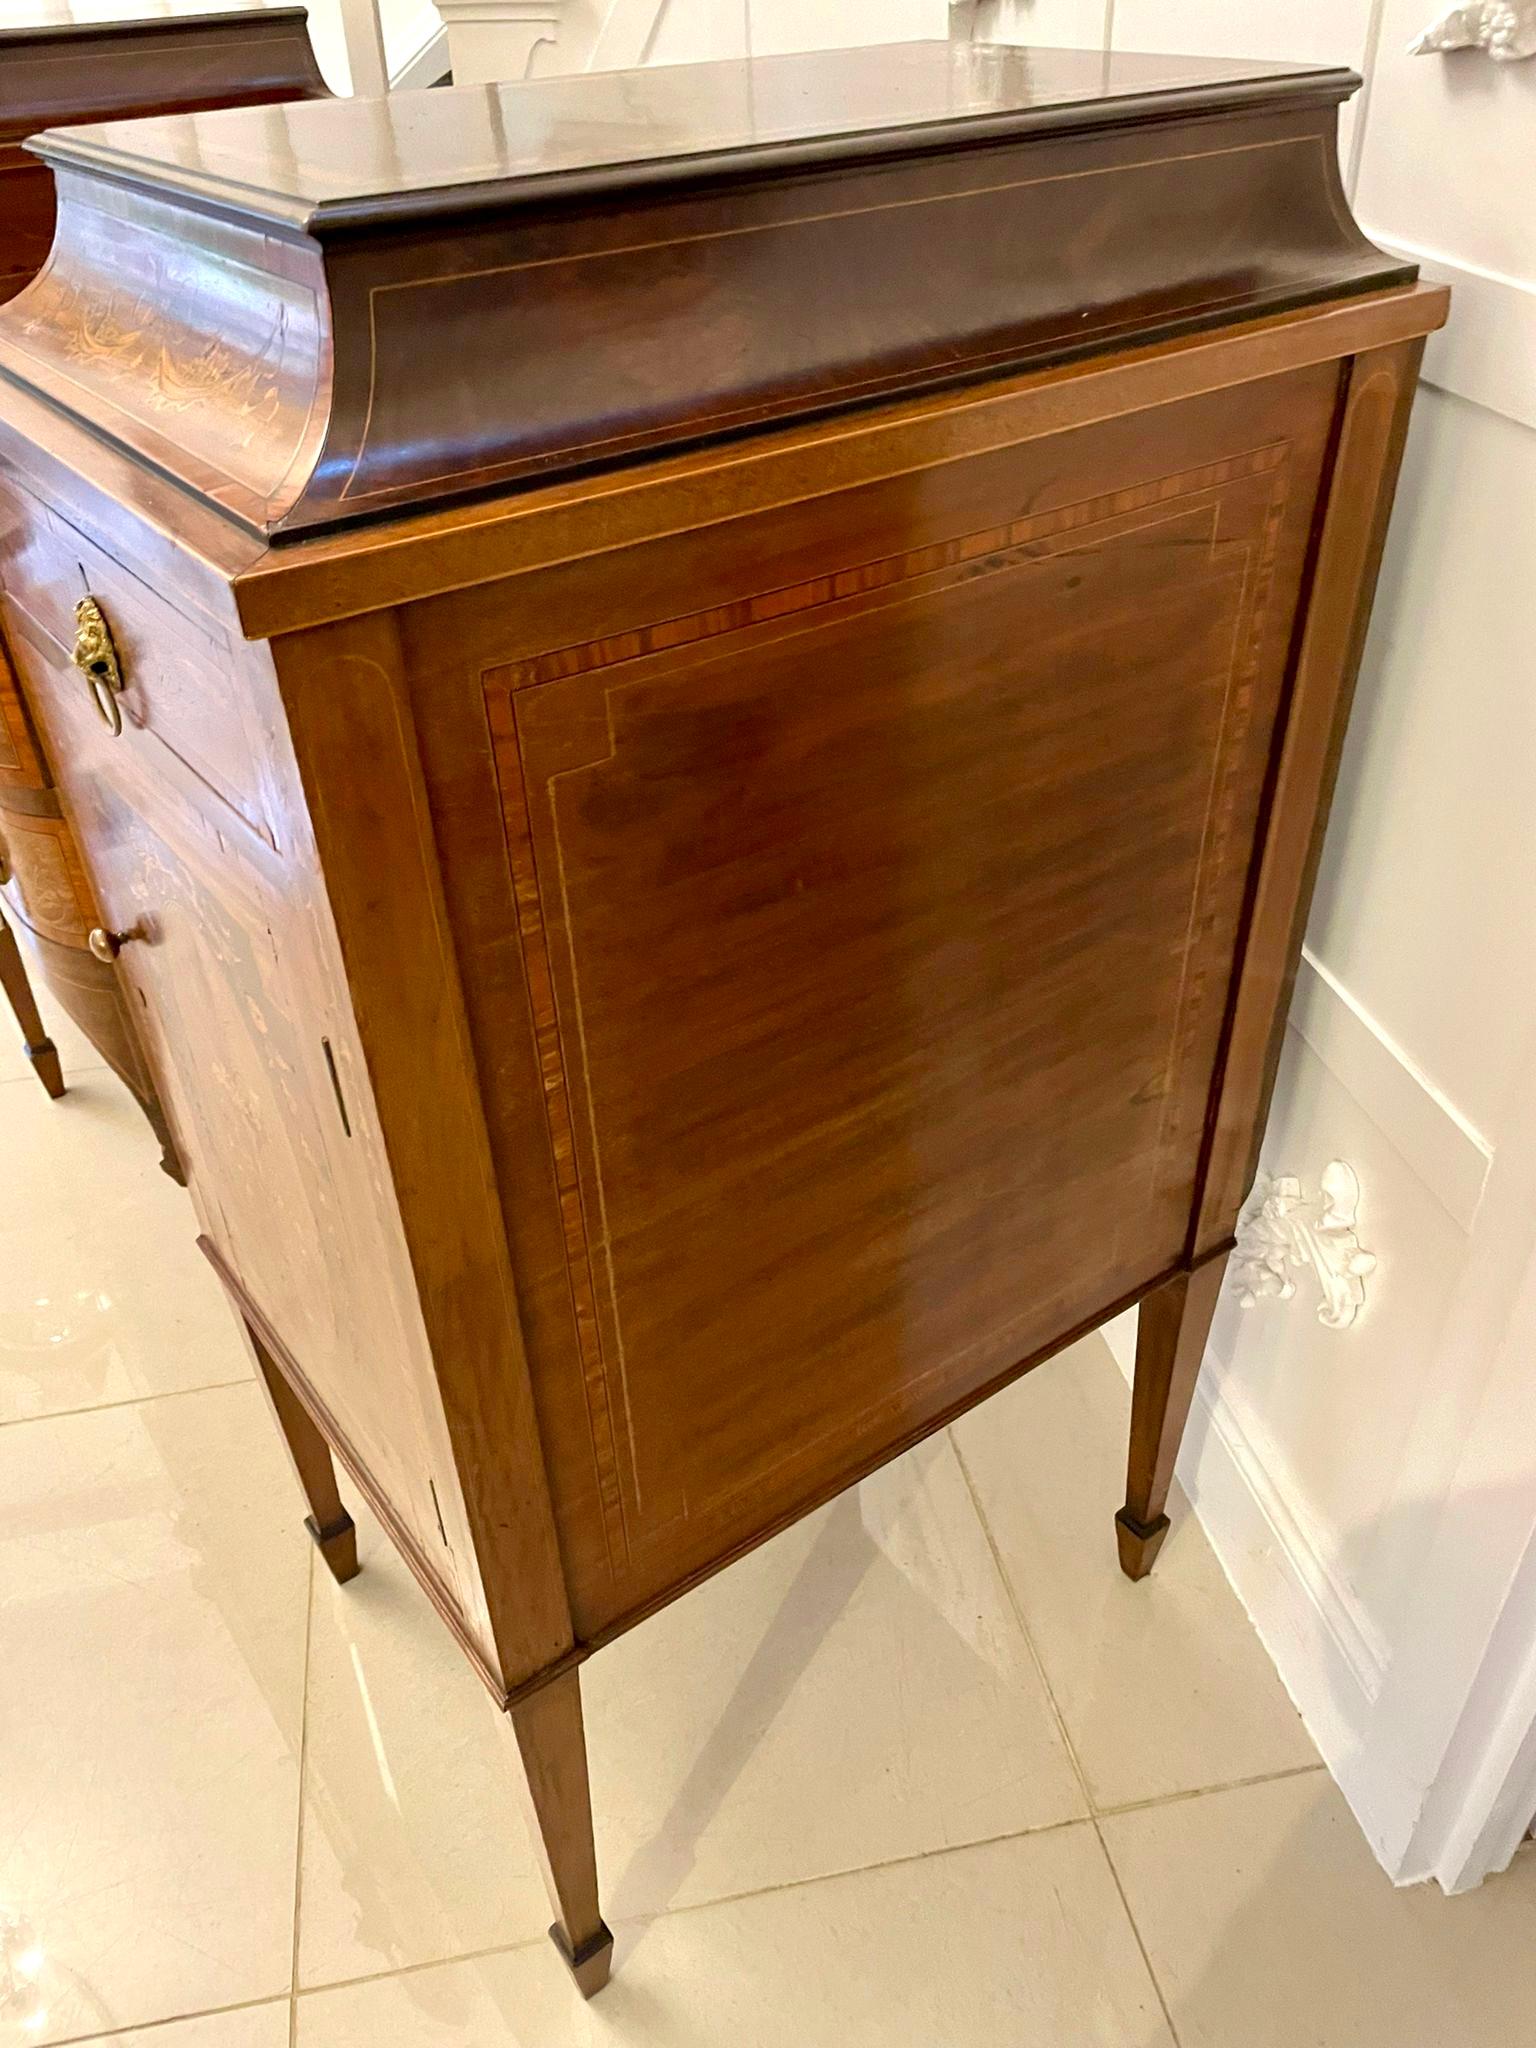 Inlay Fine Quality Antique Mahogany Inlaid Marquetry Sideboard By Hewetsons, London For Sale